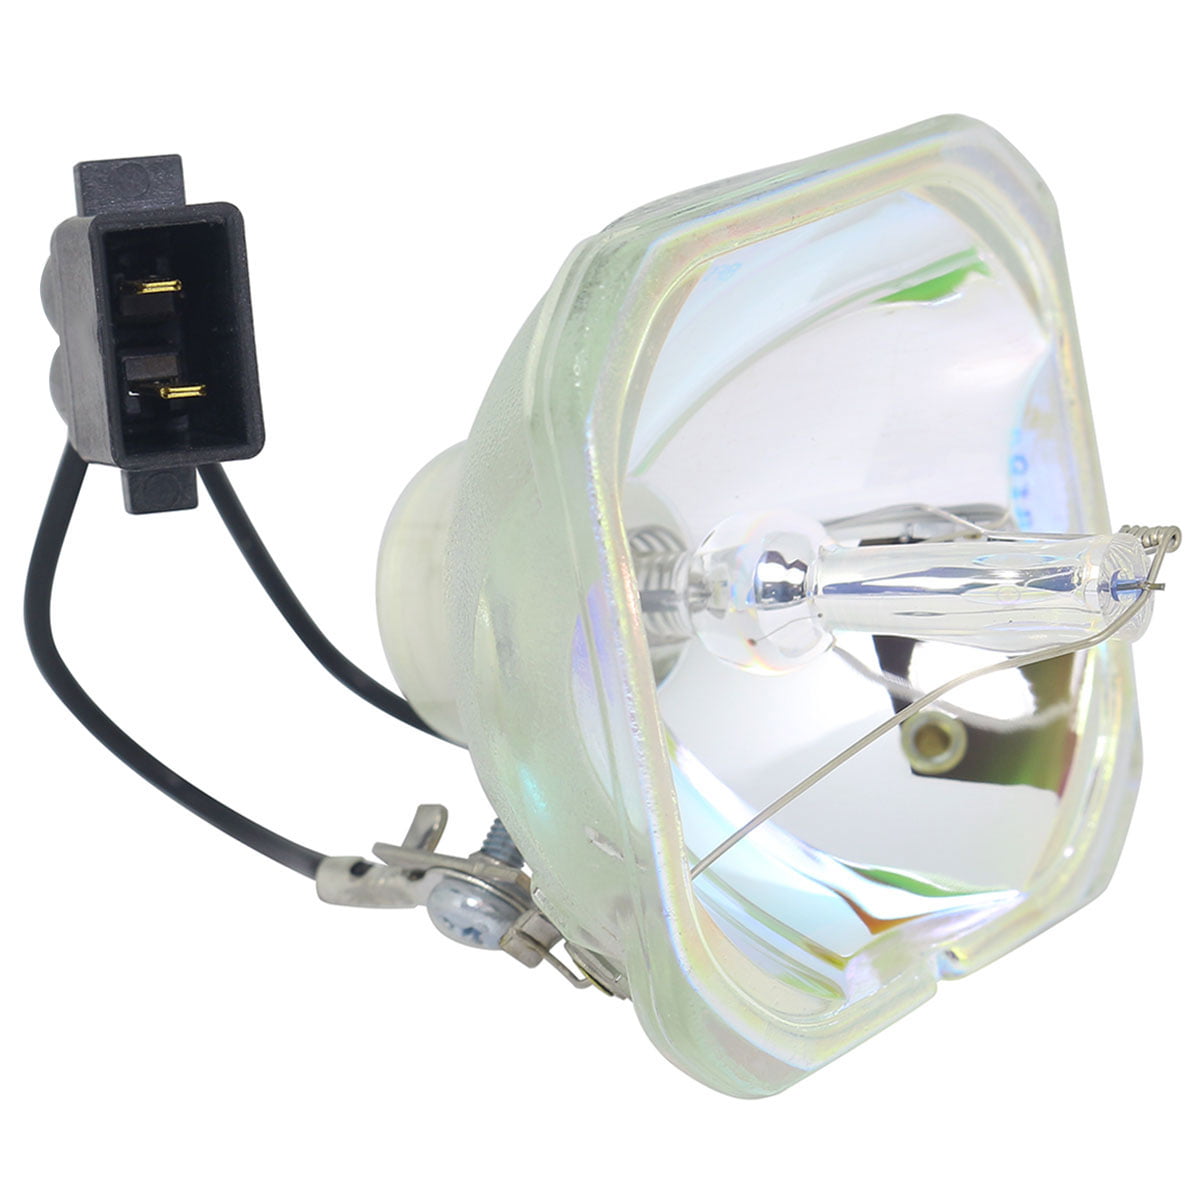 Replacement Lamp and Housing with Original Osram Bulb Inside for W3000 XpertMall